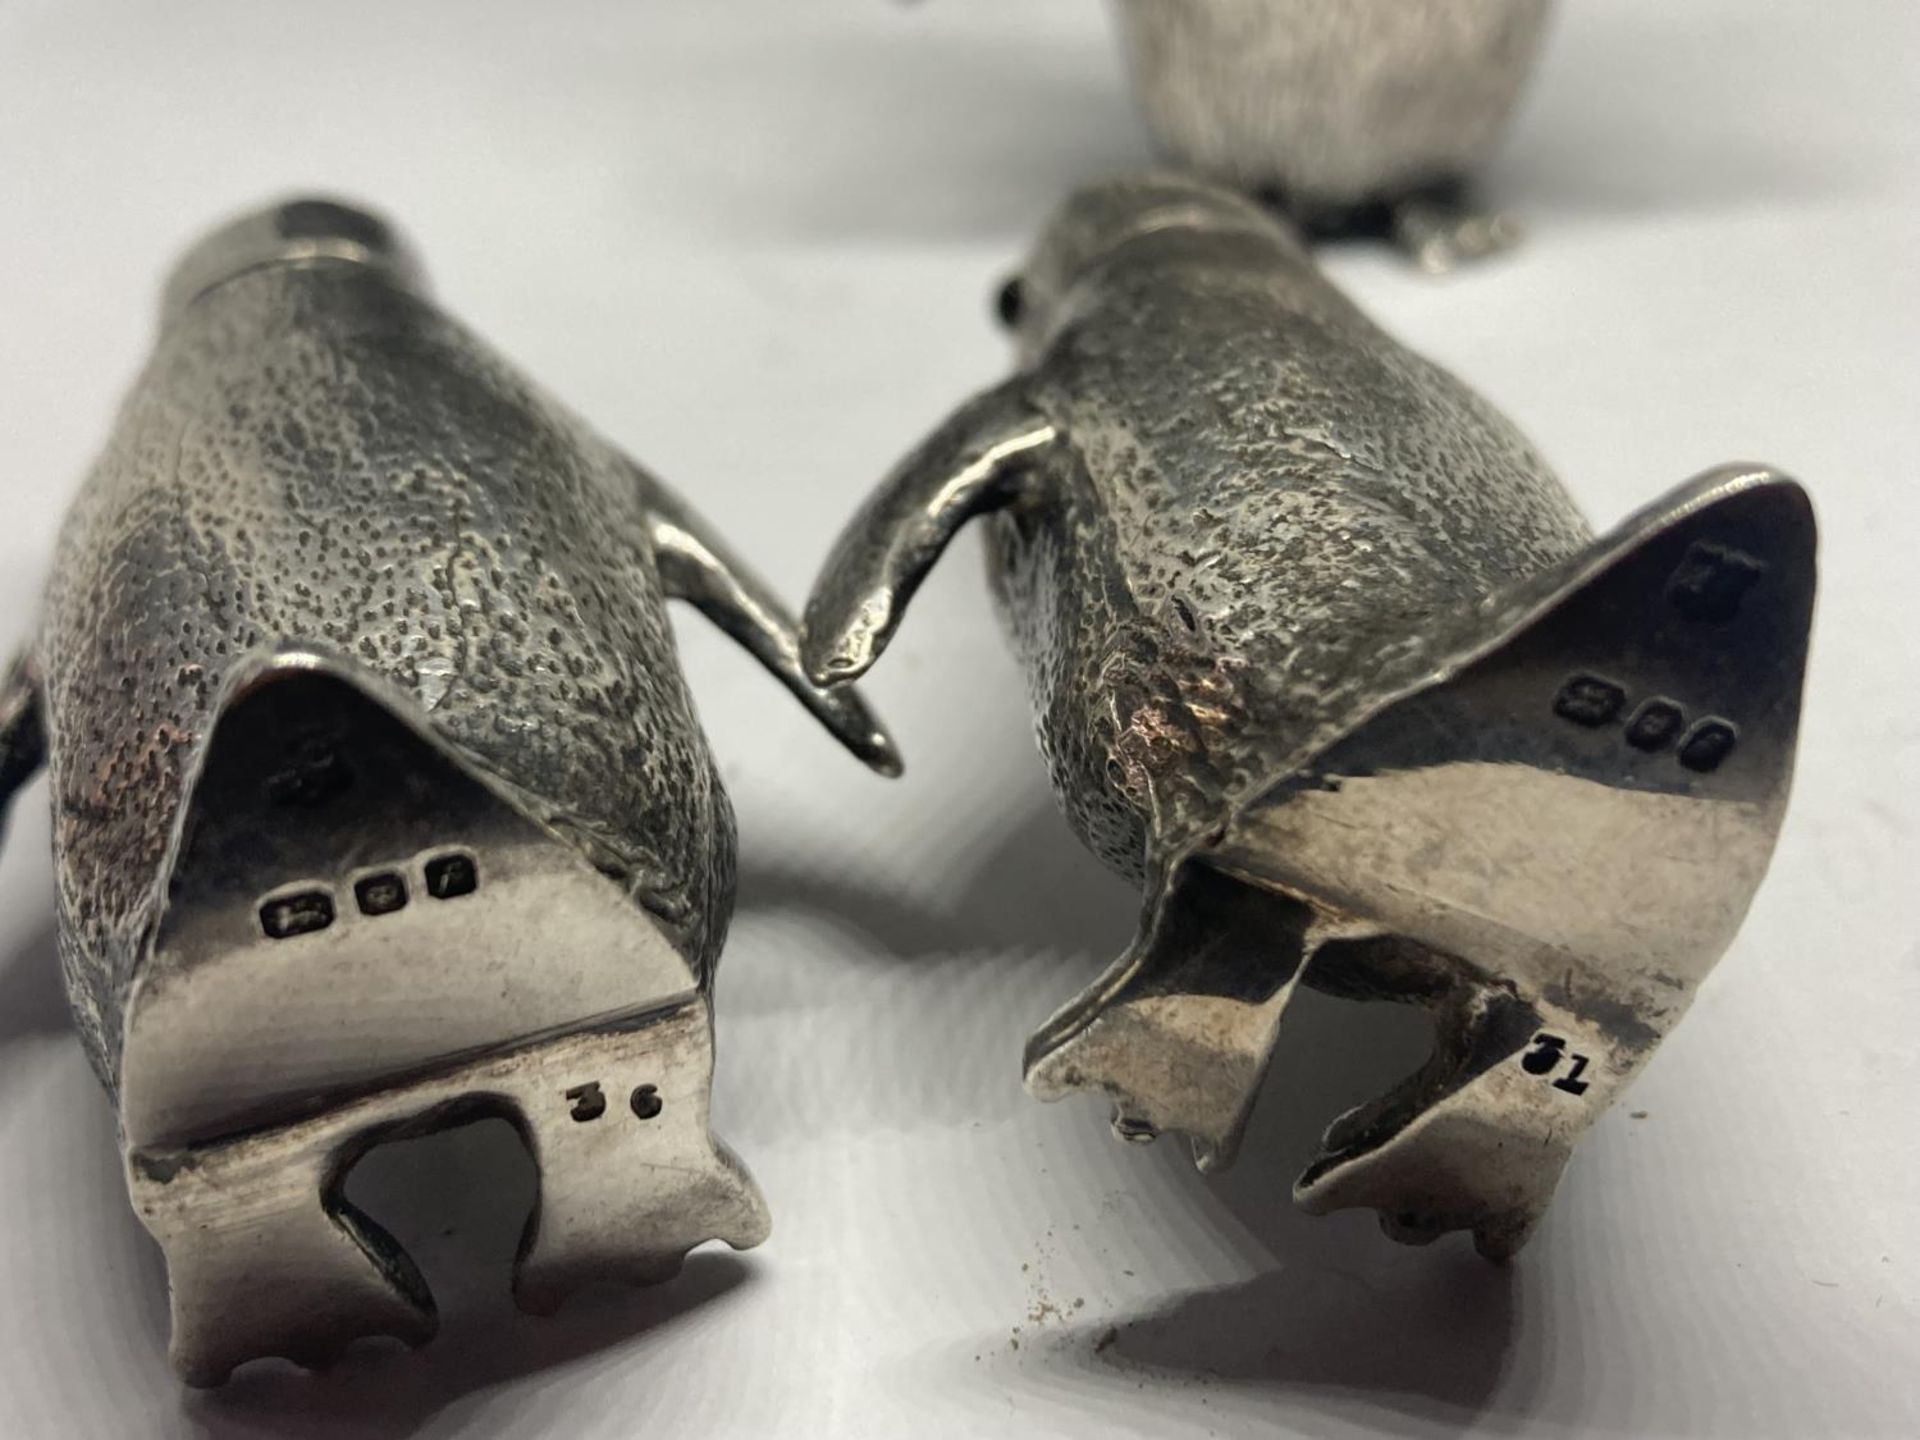 A HALLMARKED LONDON SILVER CRUET SET IN THE FORM OF THREE PENGUINS GROSS WEIGHT 279.3 GRAMS - Image 3 of 11